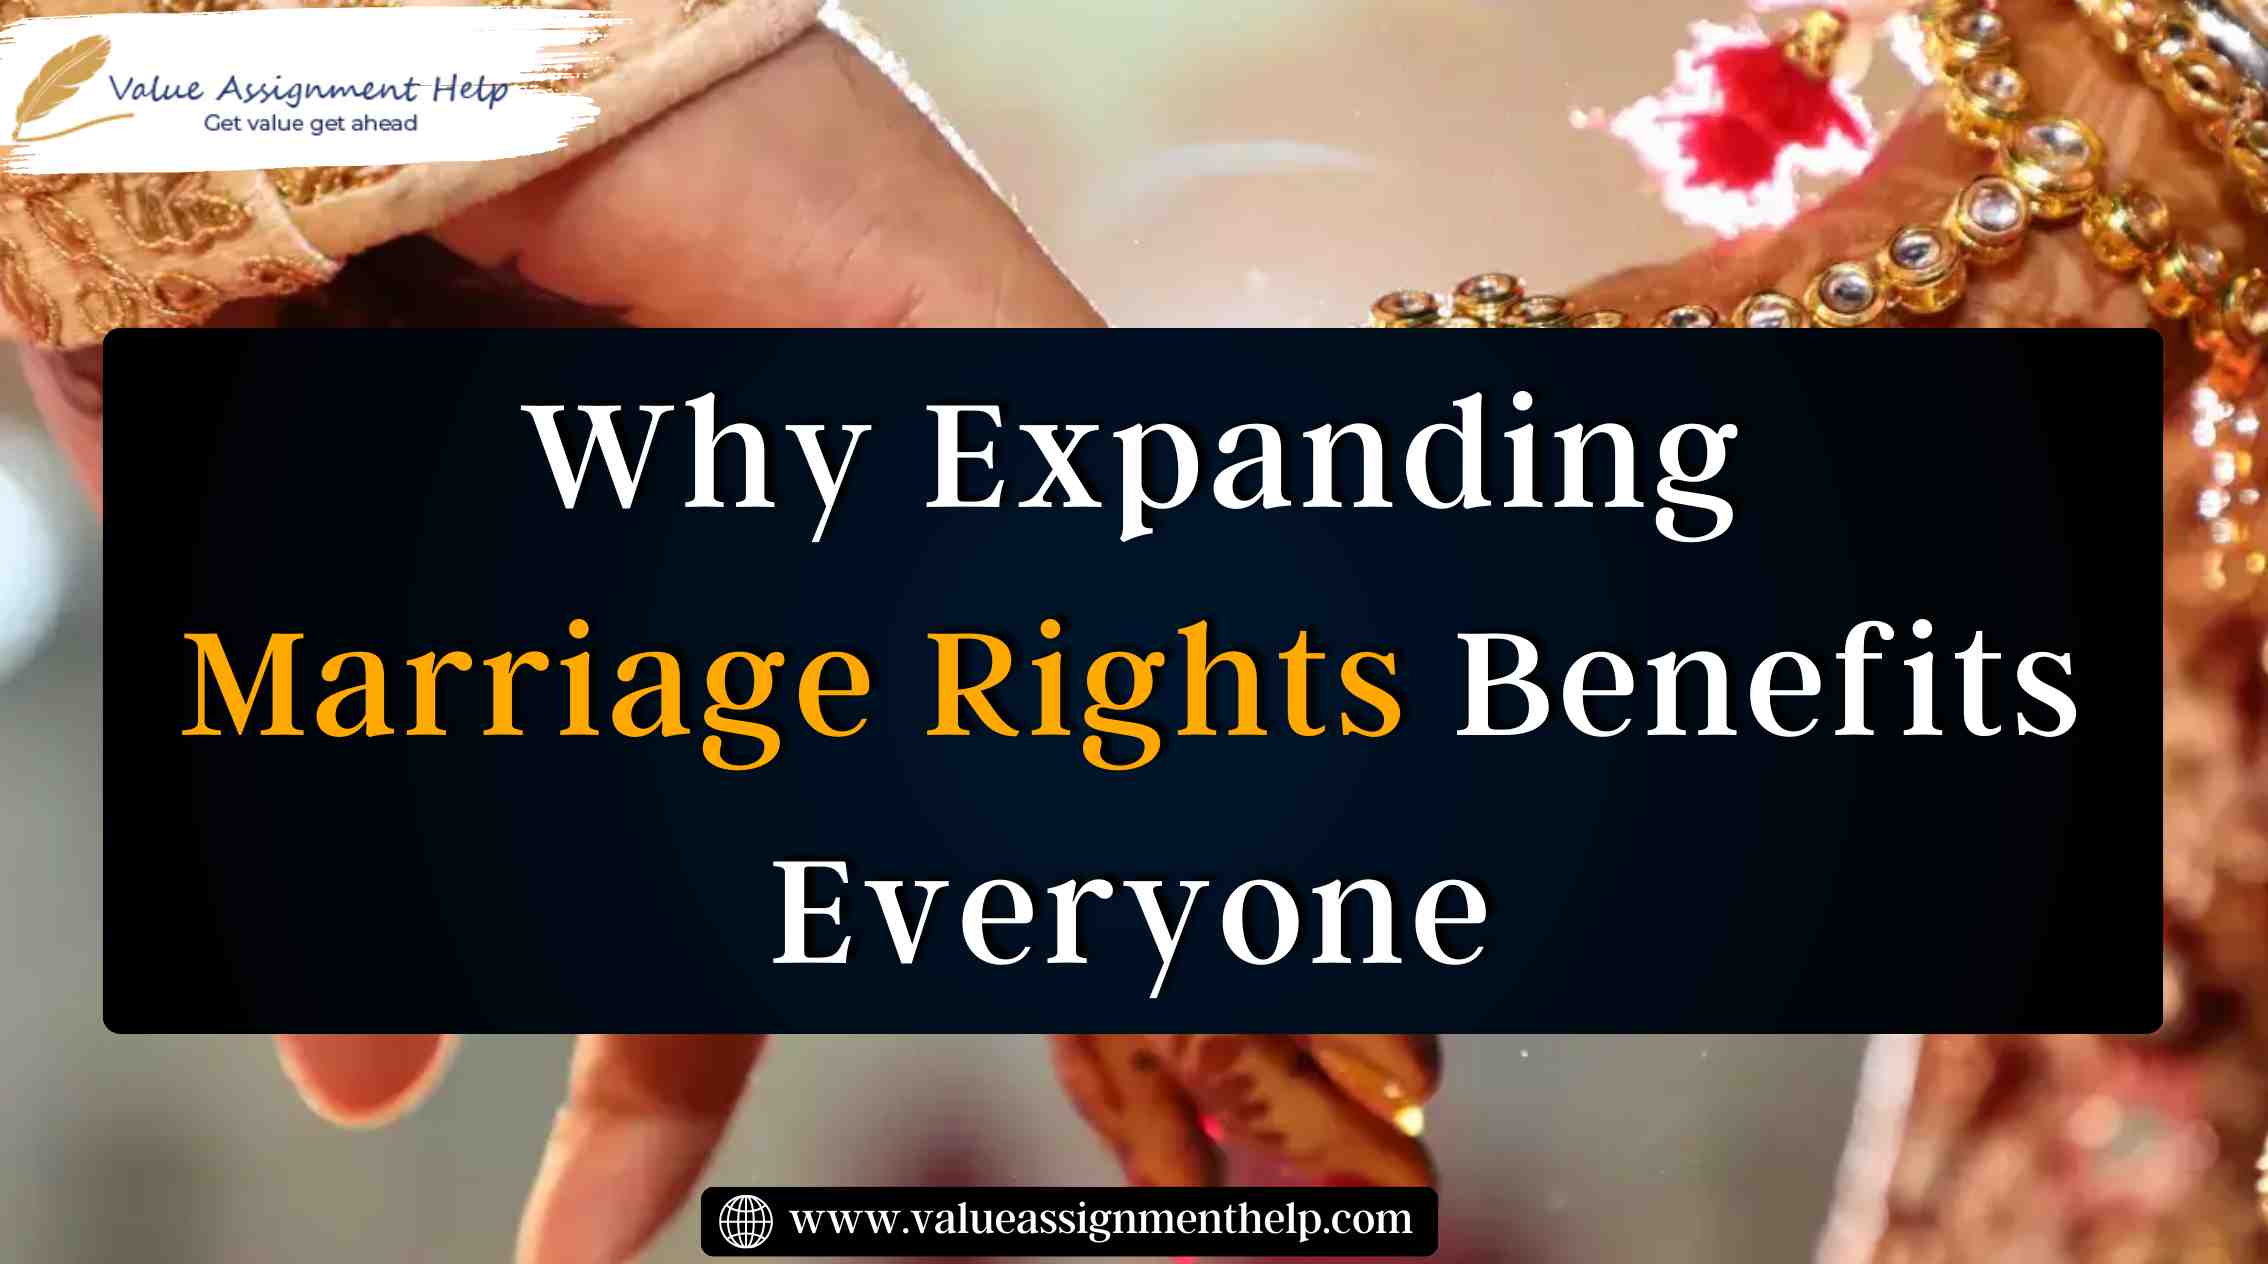  Why Expanding Marriage Rights Benefits Everyone